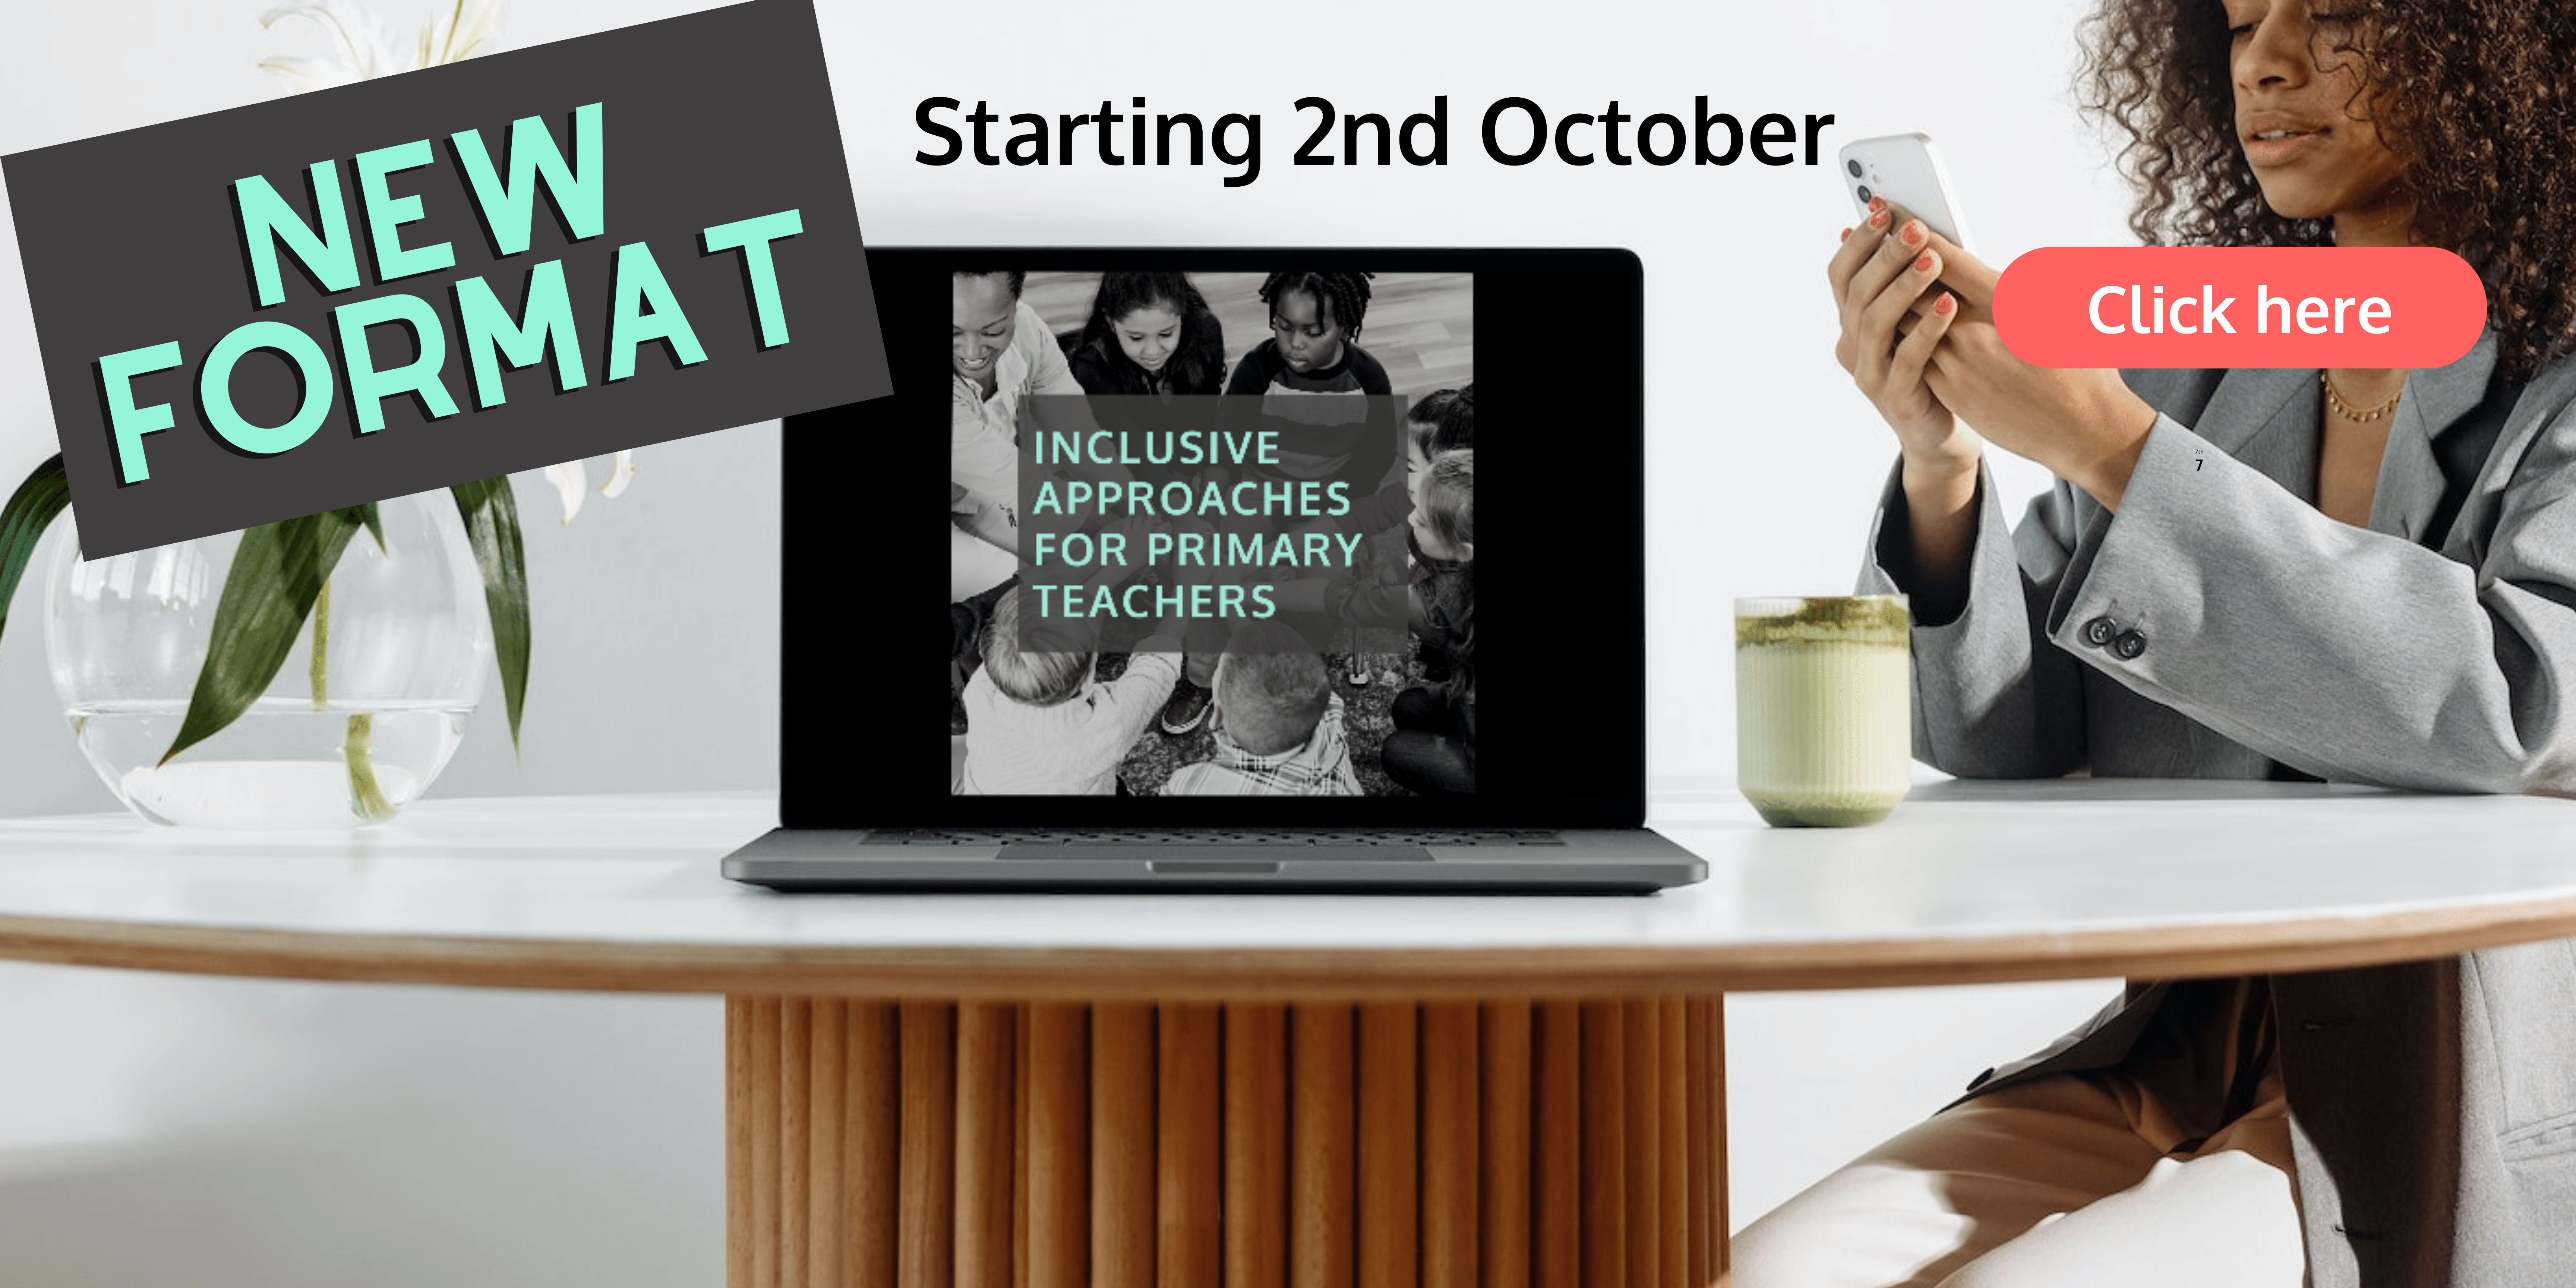 Banner for Inclusive Approaches for Primary Teachers with new format. Text reads "Starting 2nd October".